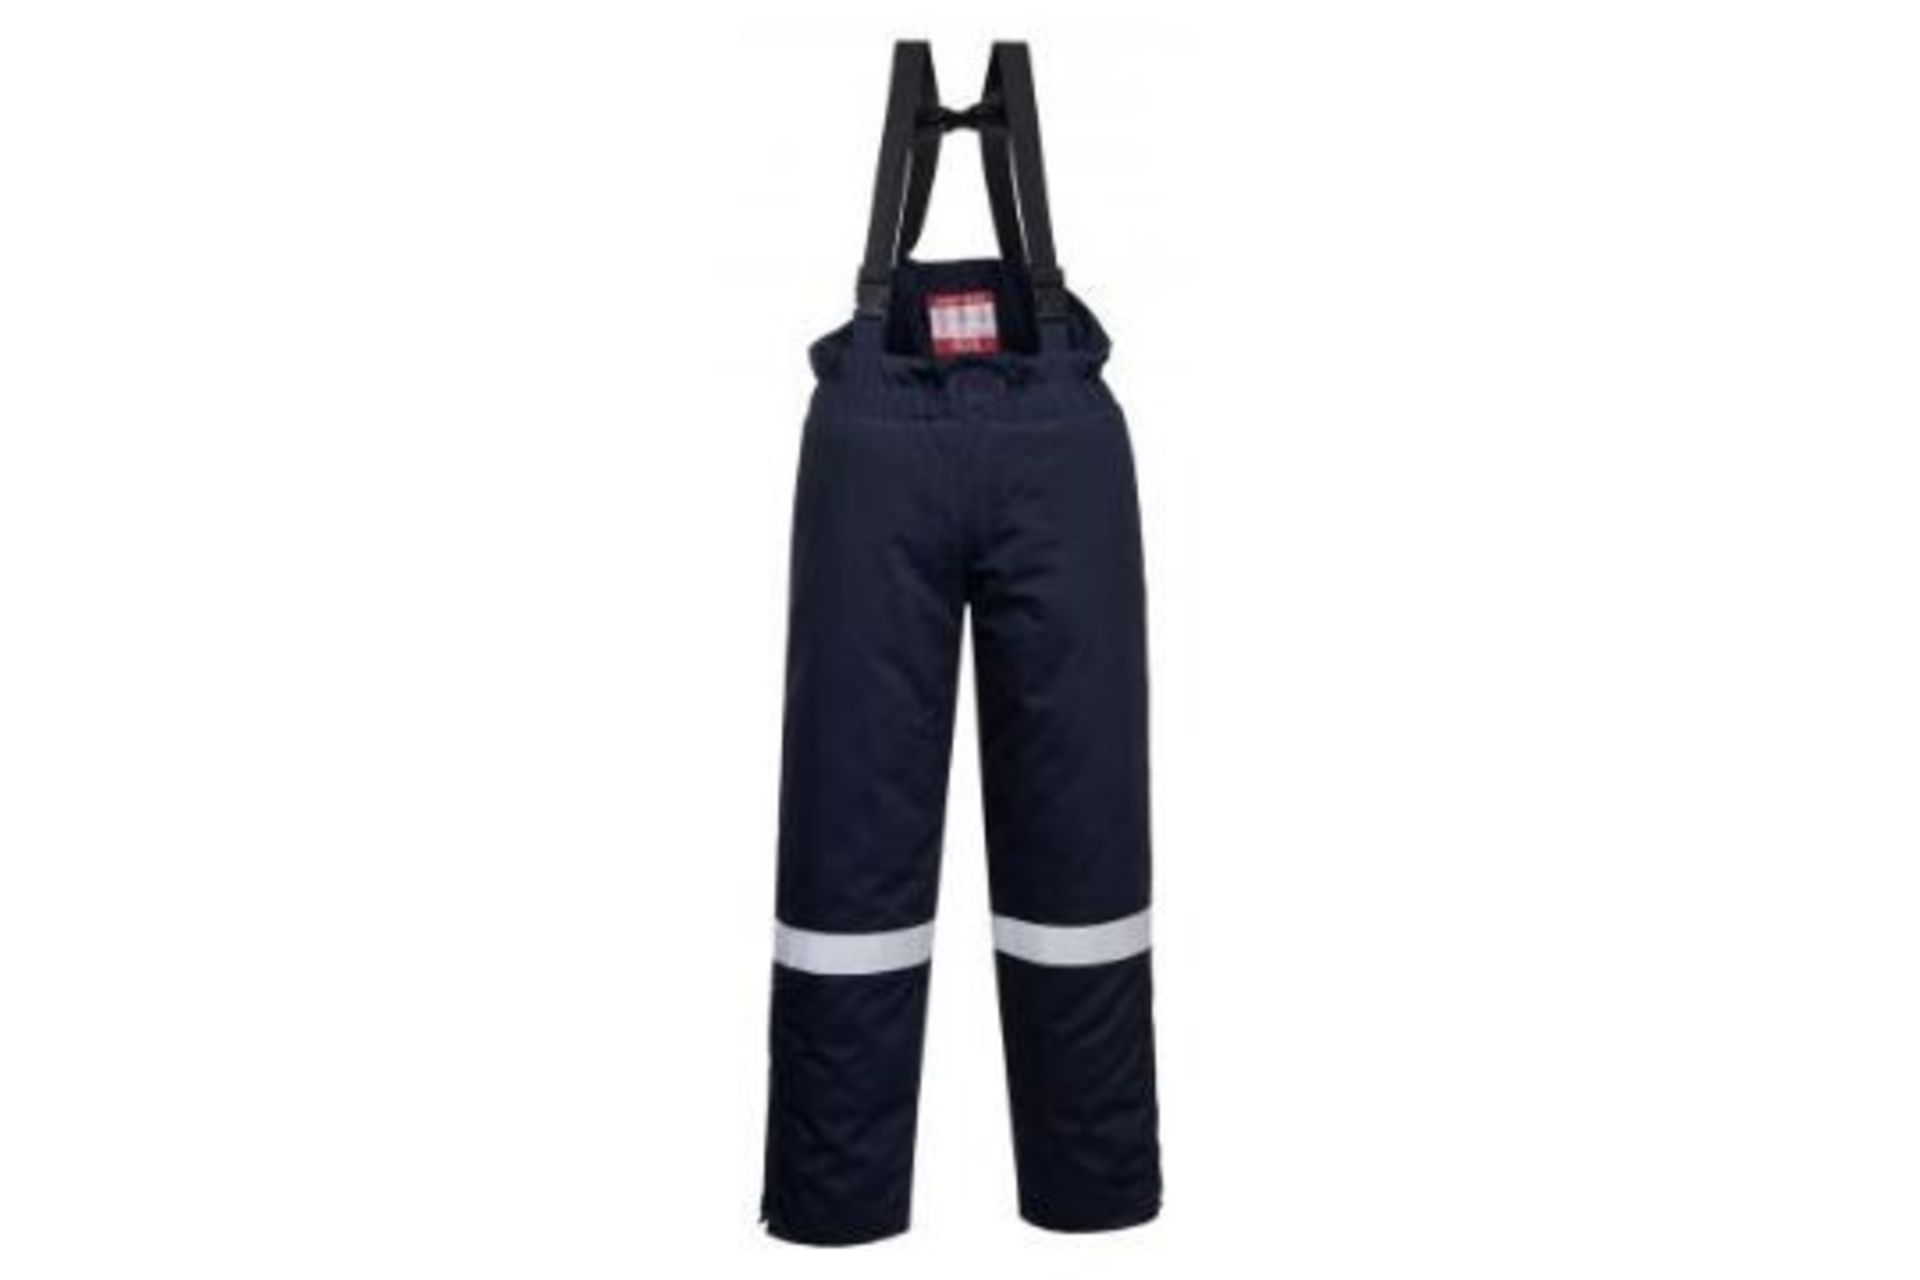 PORTWEST FR58NARS - FR58NAR - FIRE RESISTANT AND ANTI-STATIC NAVY BLUE WINTER BIB AND BRACE. - (